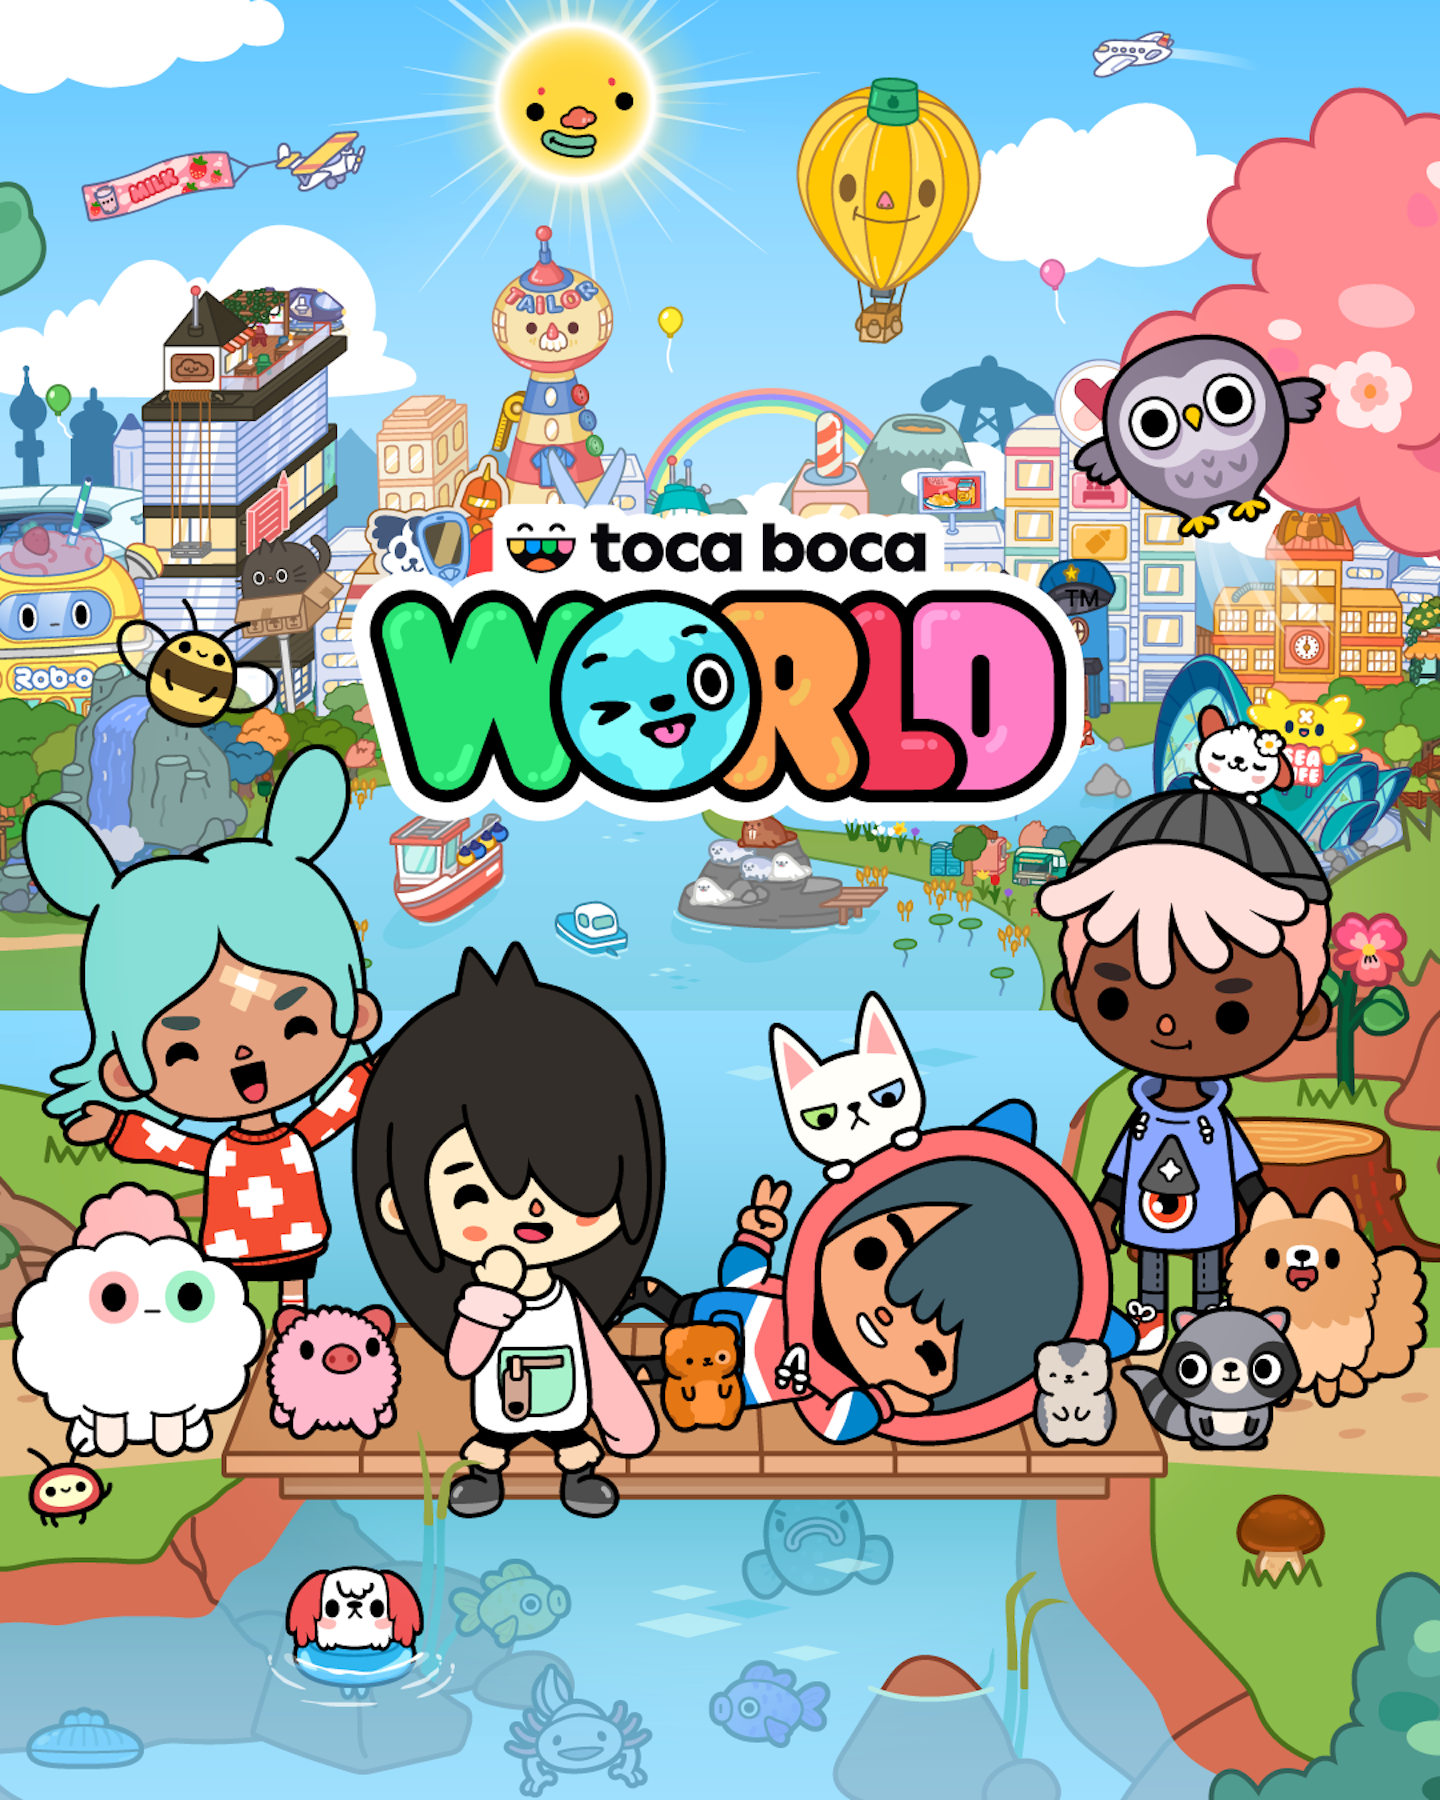 This is the key art for Toca Boca World. Many of the characters from the game are standing standing on a bridge over a calm river which is flowing down from Bop City. We see many crumpets and fantasy characters hiding in various locations and some animals on the banks of the river. The logo for Toca Boca World can be seen in the top middle third of the image.